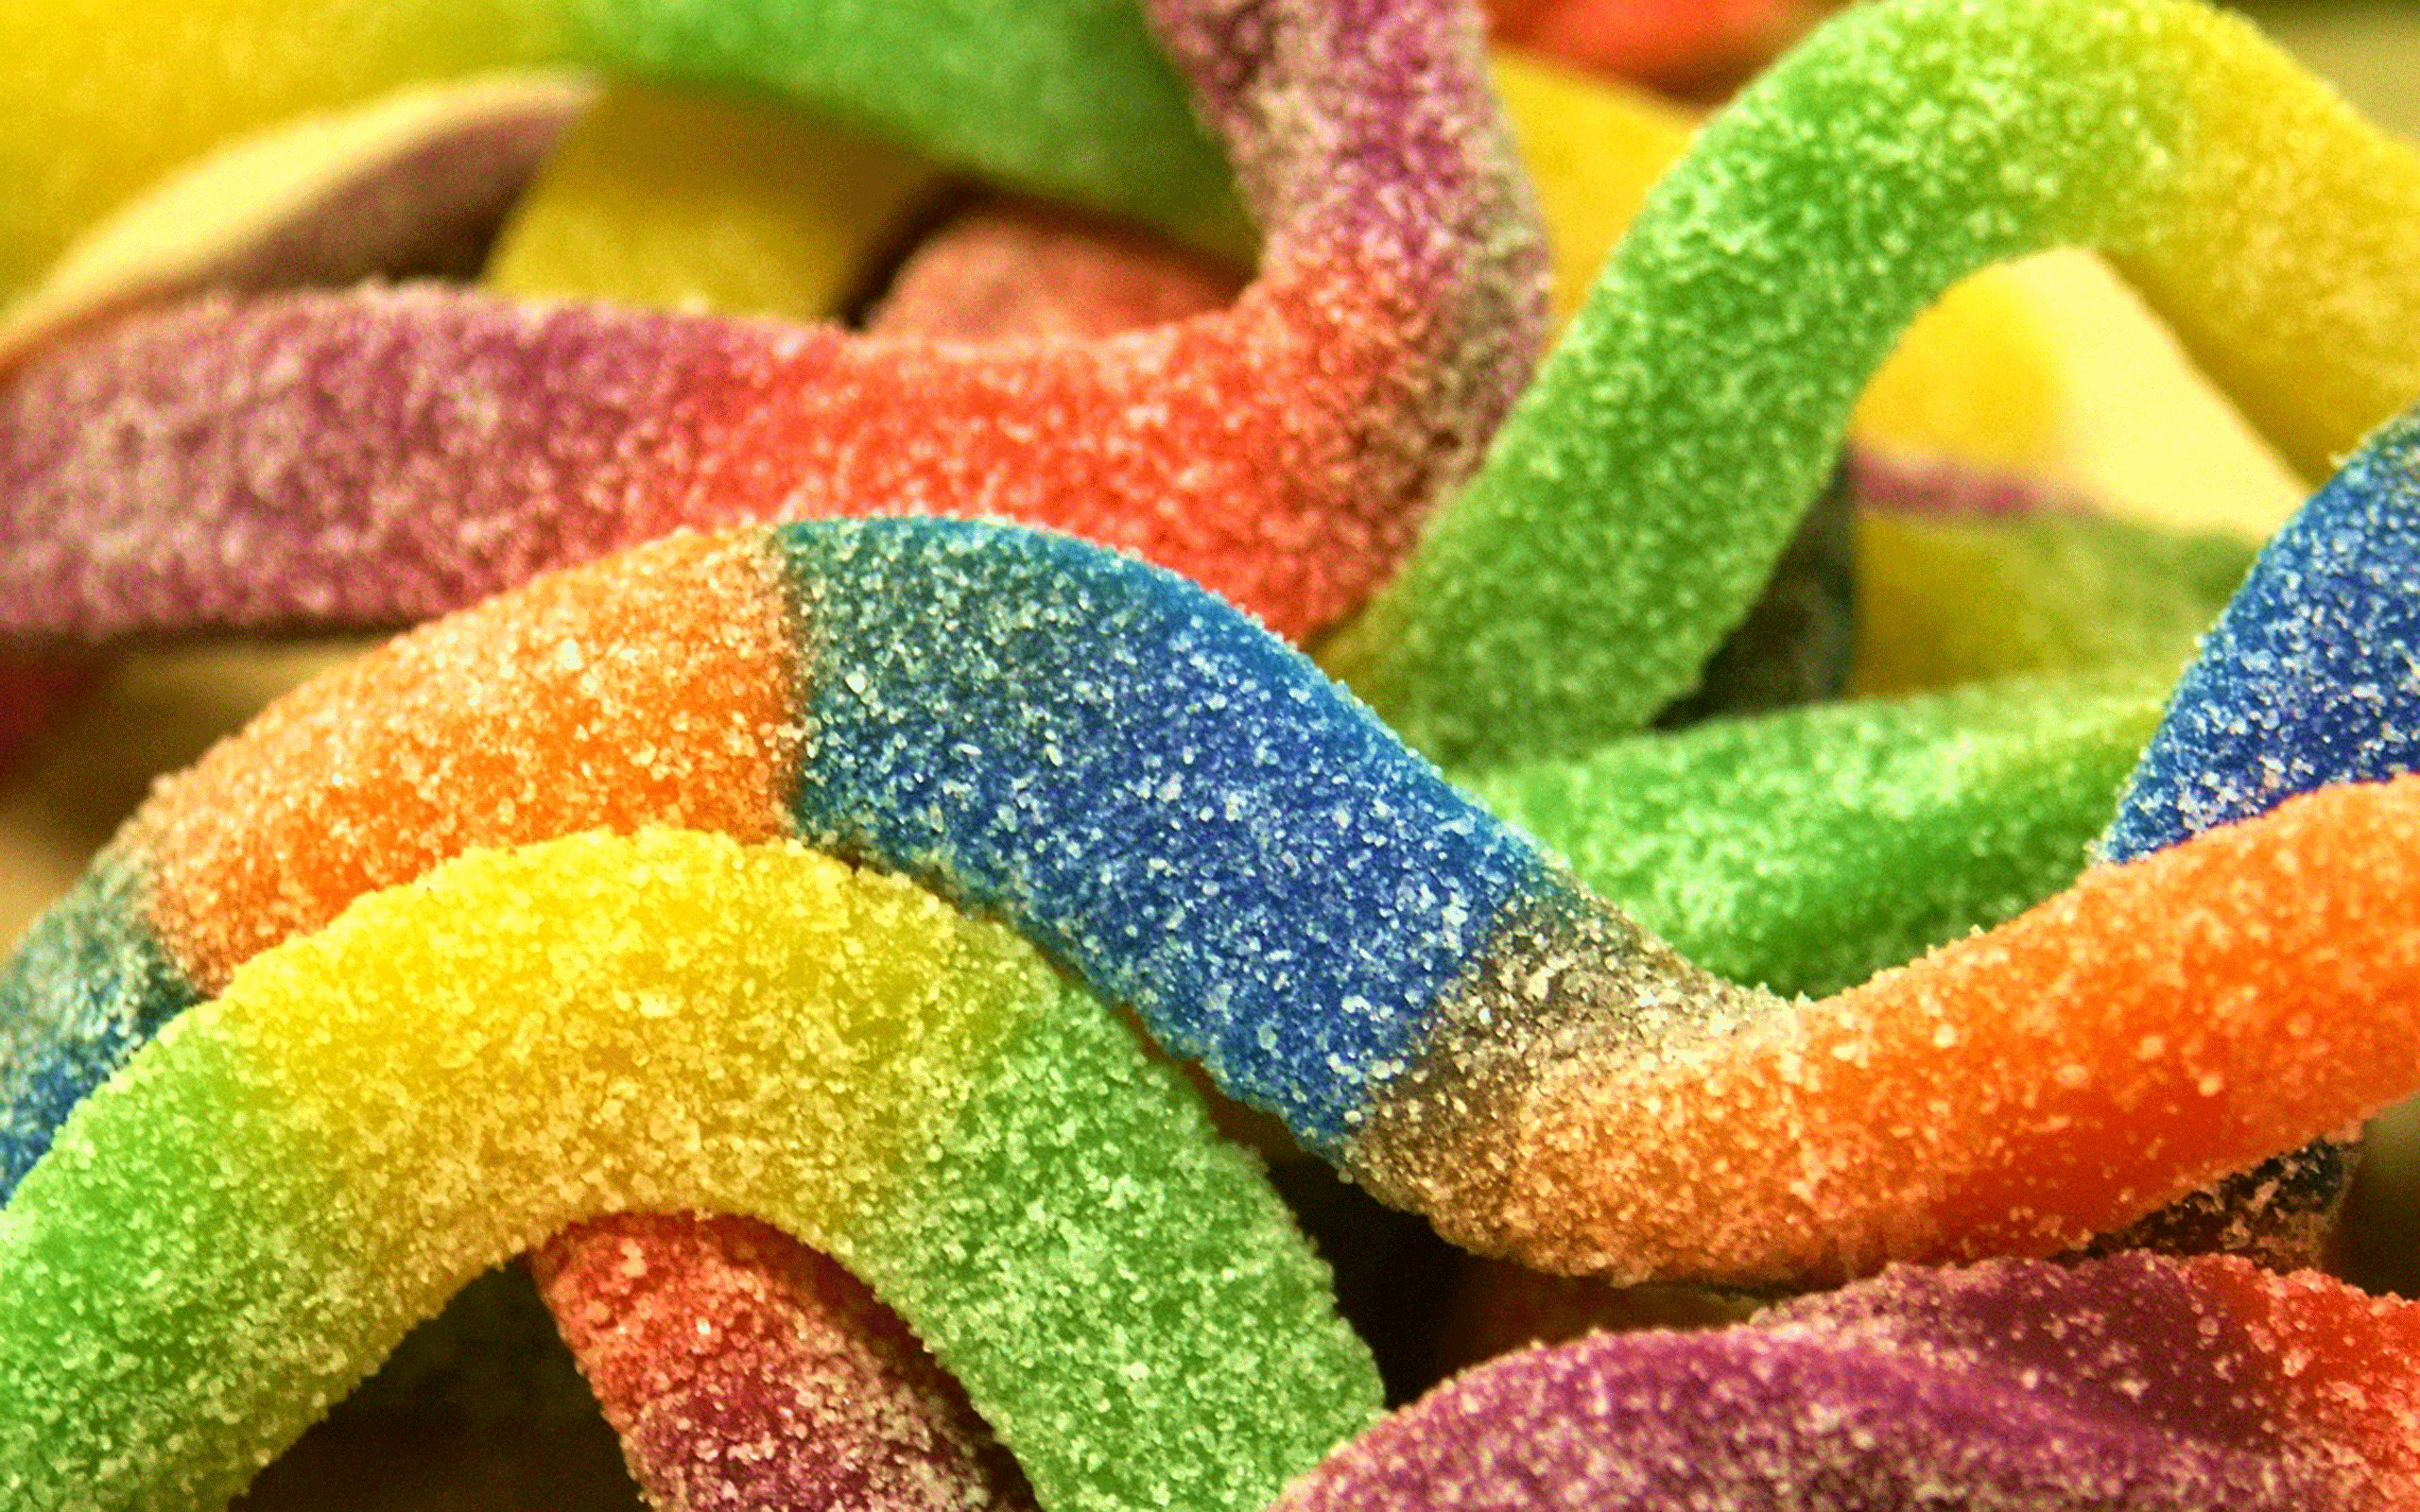 HD Sweet Candy Candies Wallpaper 1080p Full Size